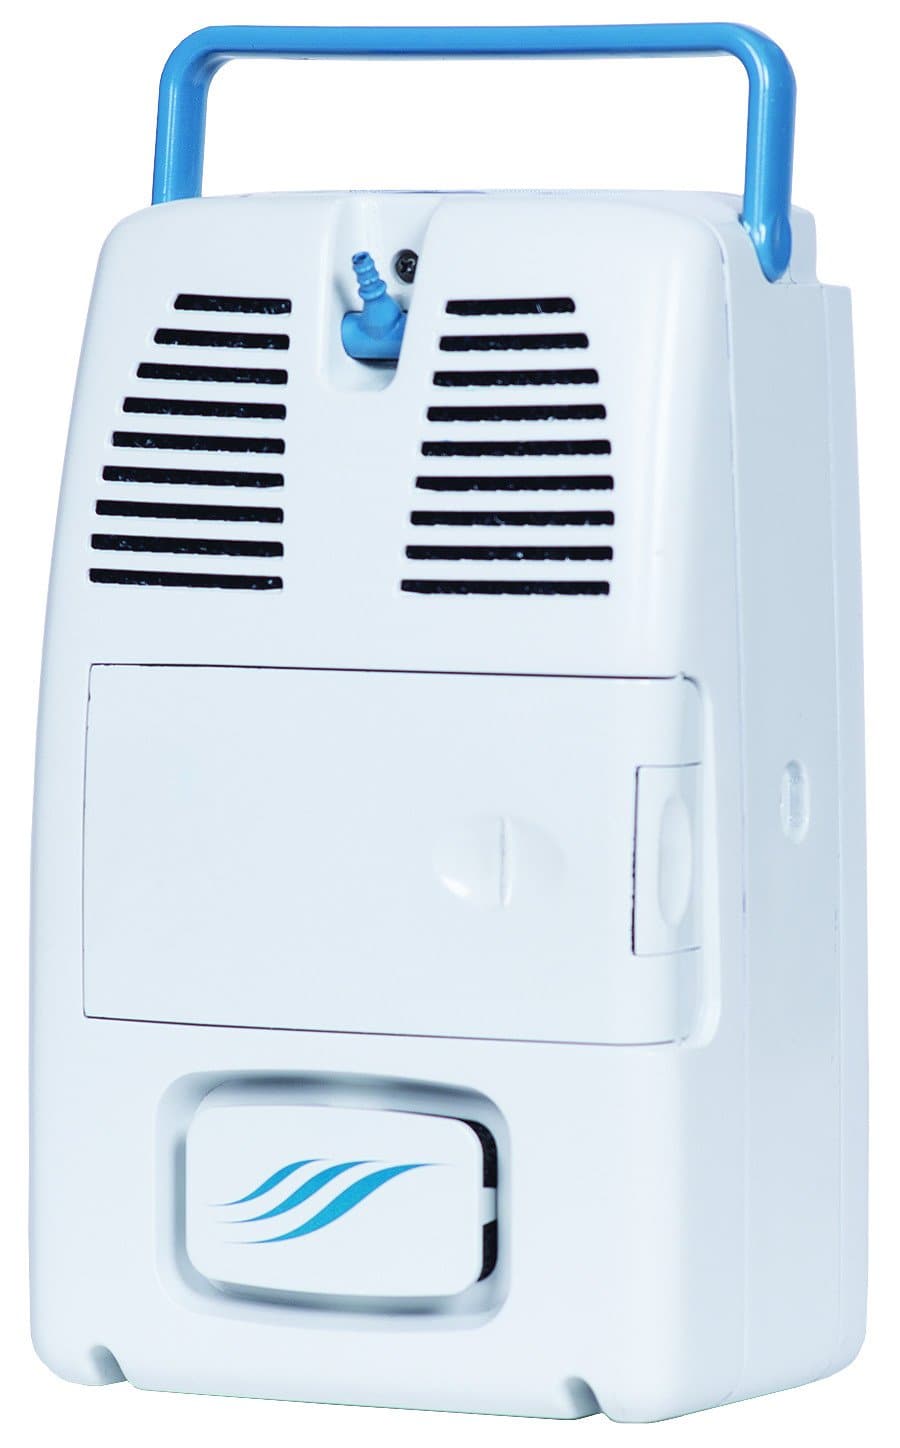 AirSep FreeStyle 5 Portable Oxygen Concentrator